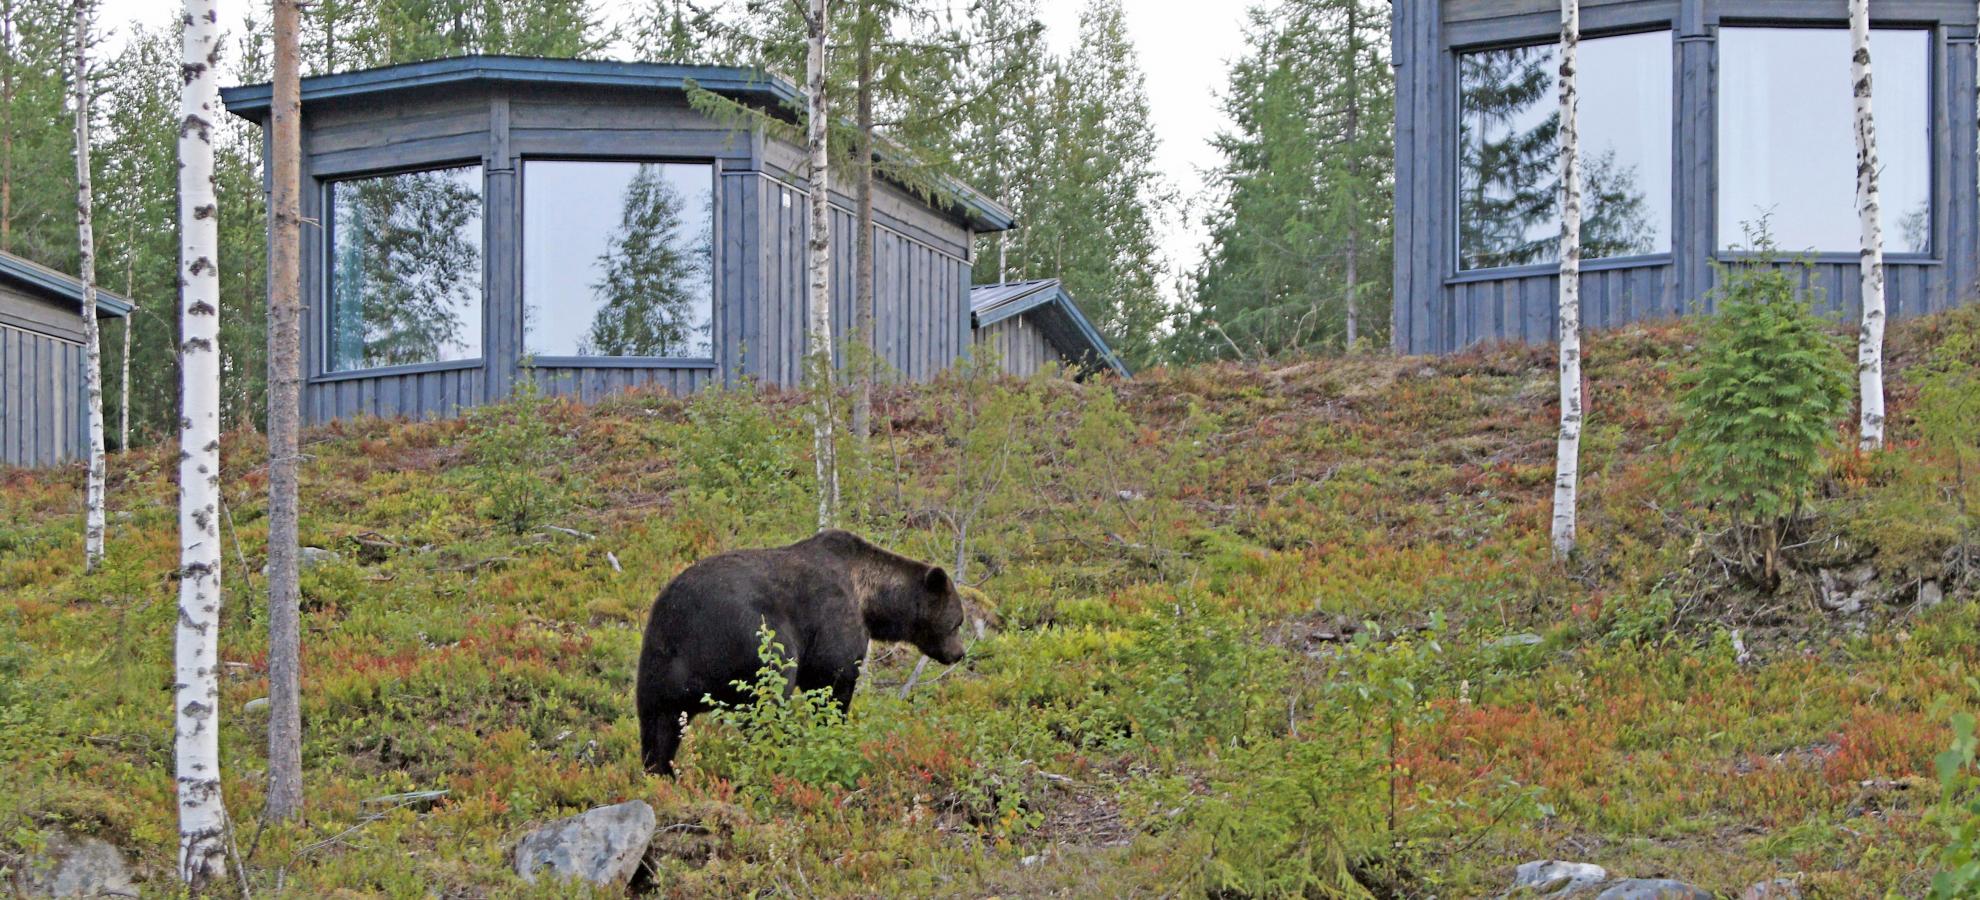 Bears infront of the cabins